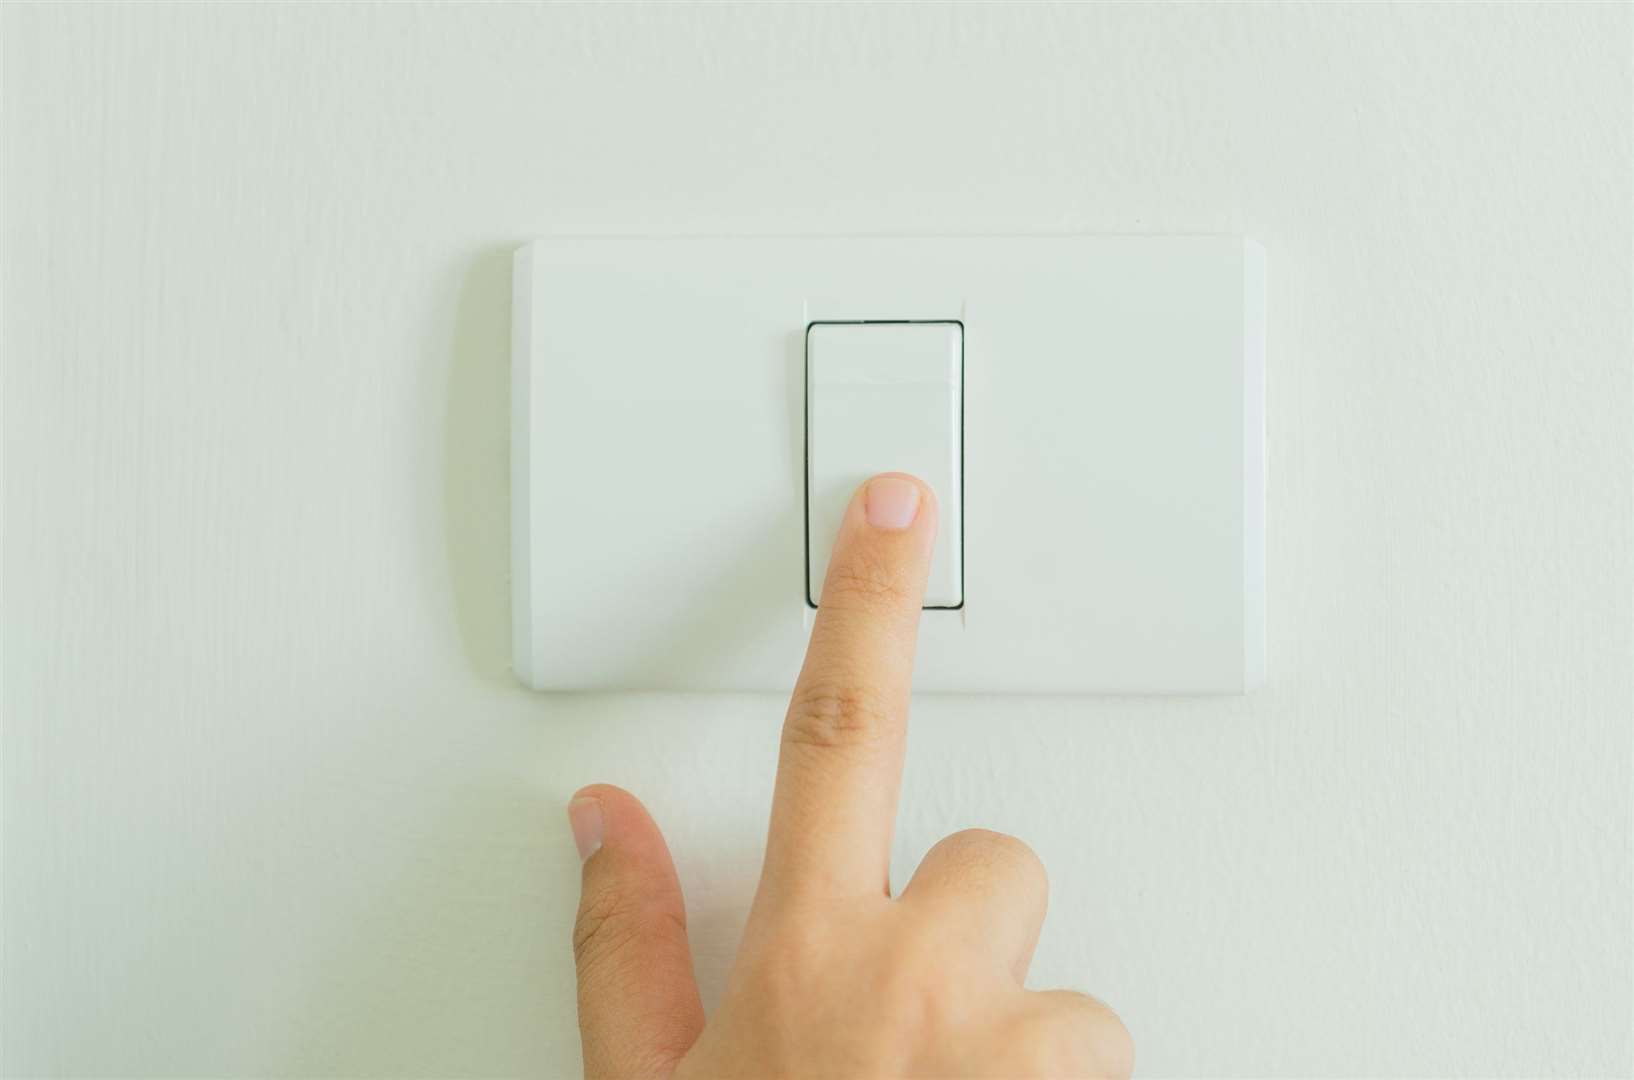 Turning off lights when you leave a room could save you £20 a year at least. Image: Stock photo.